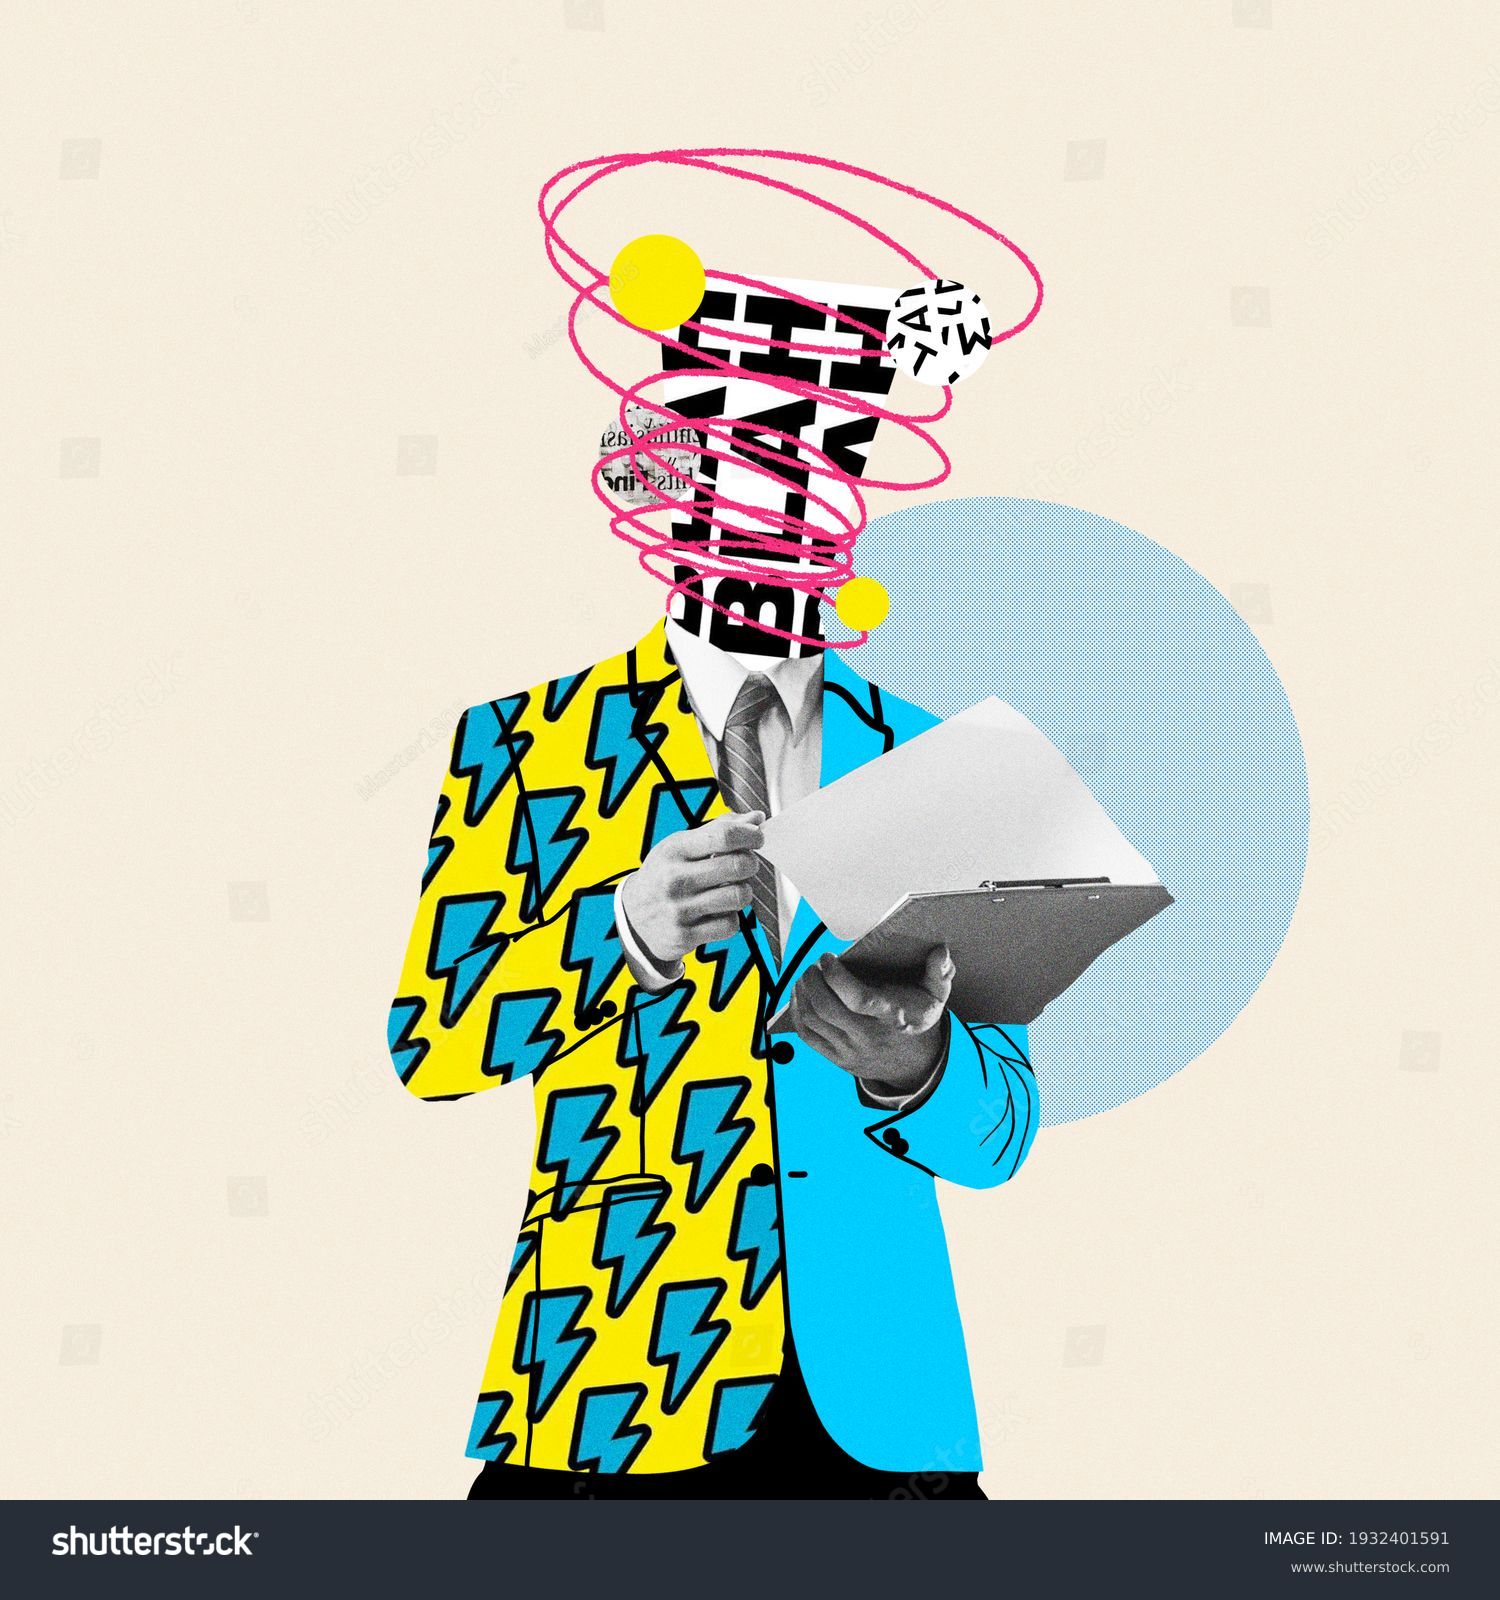 Unstoppable talks in head. Comics styled yellow suit. Modern design, contemporary art collage. Inspiration, idea concept, trendy urban magazine style. Negative space to insert your text or ad. #1932401591